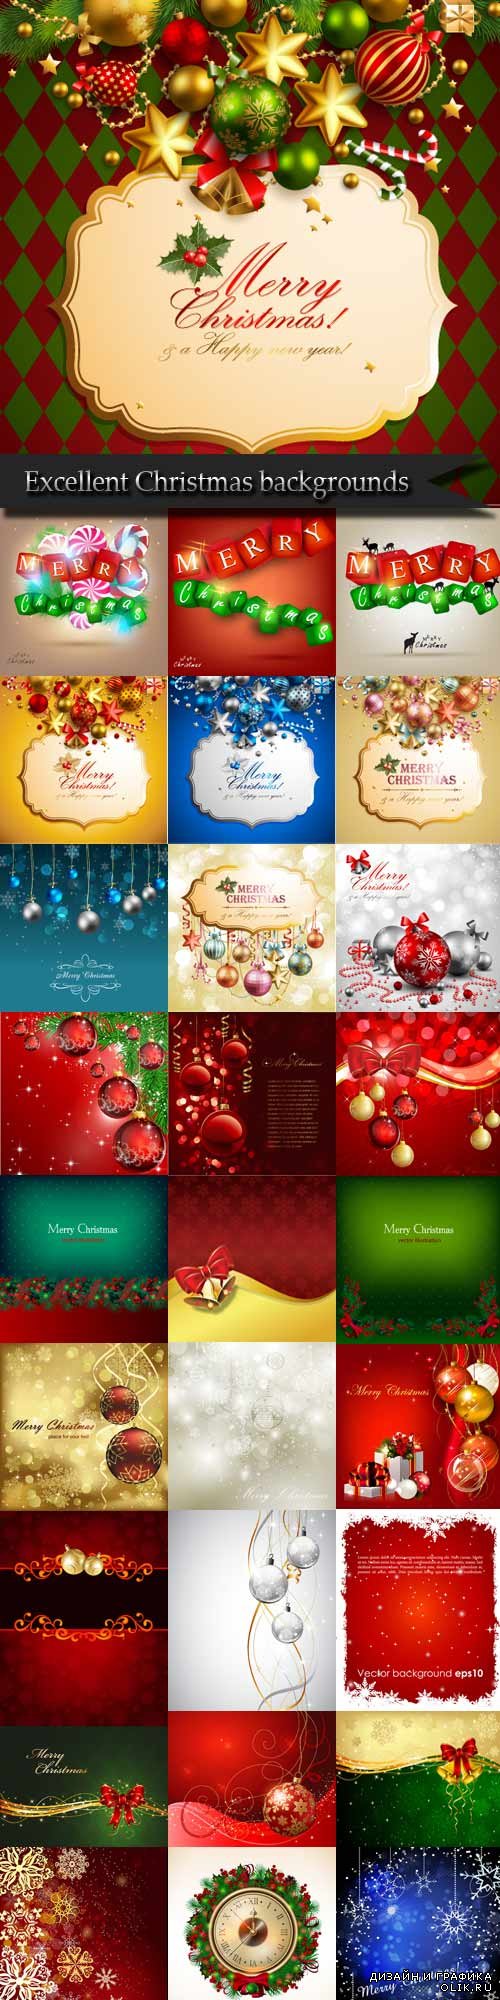 Excellent Christmas backgrounds